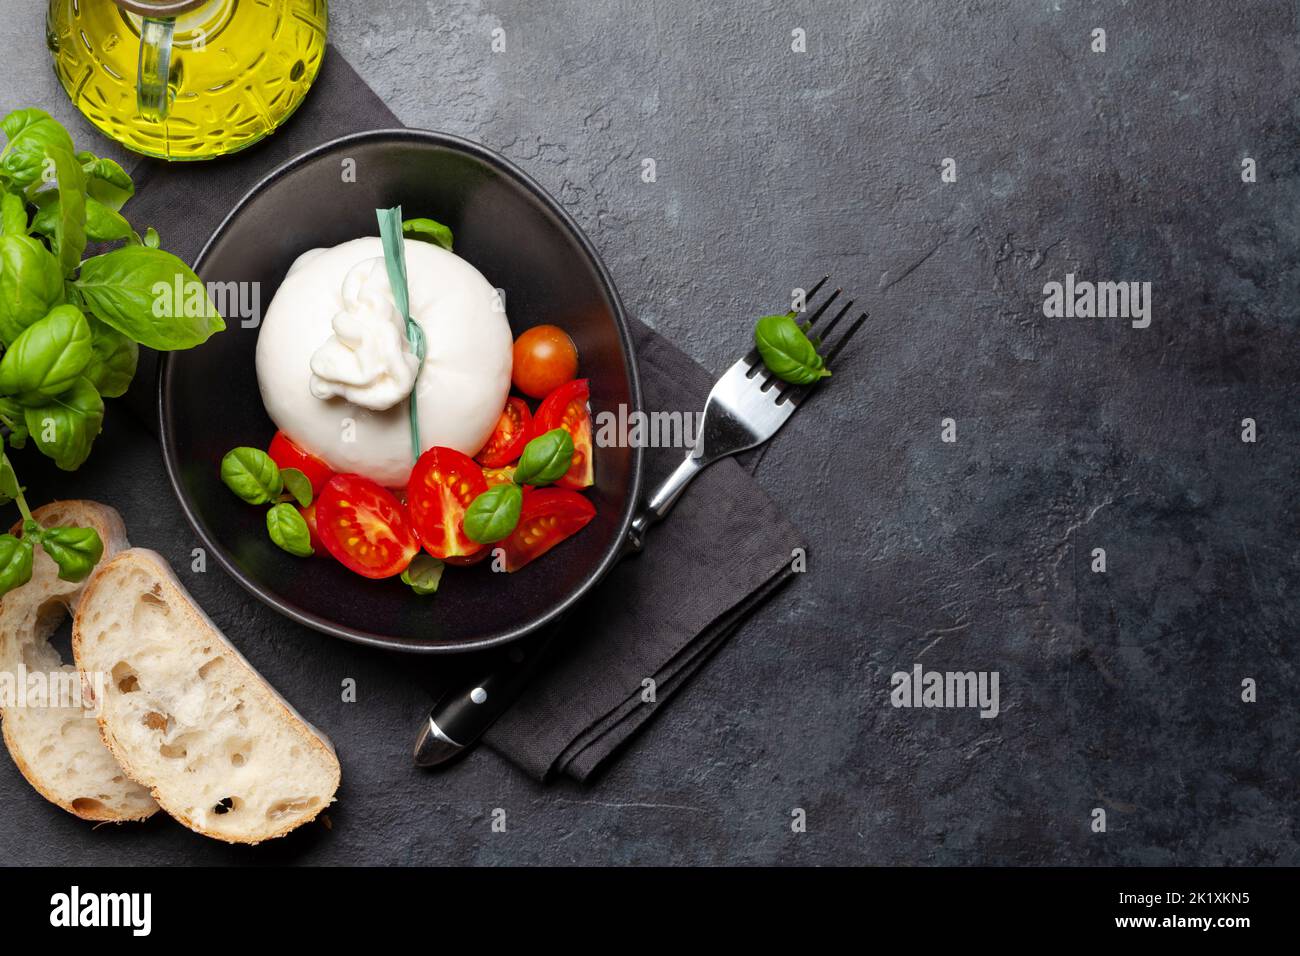 Burrata cheese, various tomatoes and olives. Italian cuisine. Flat lay with copy space Stock Photo